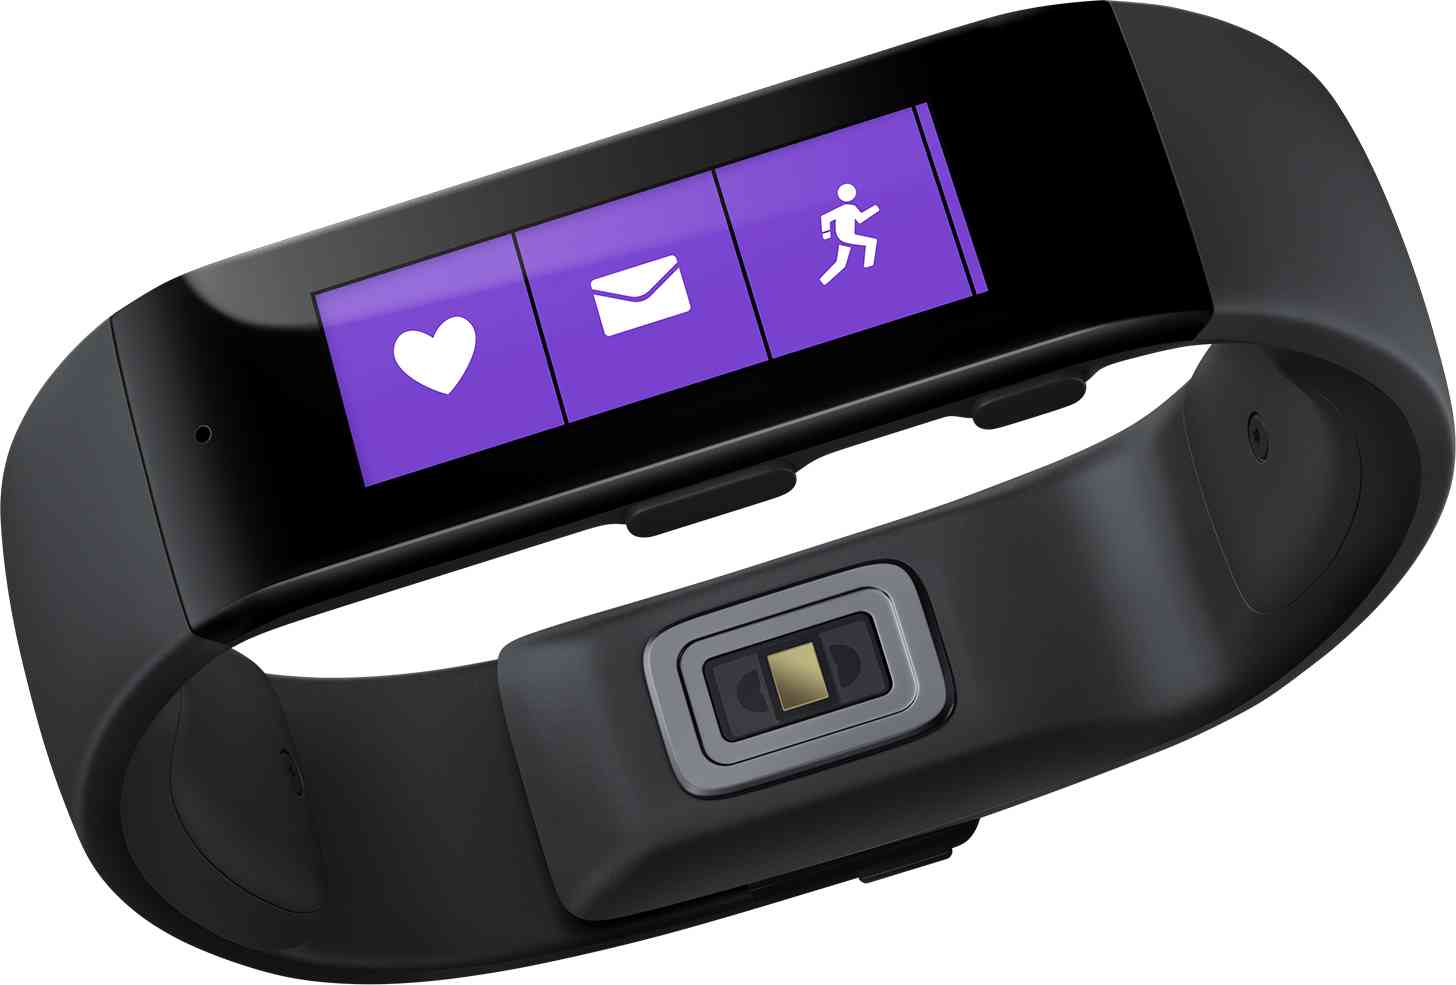 Microsoft Band official